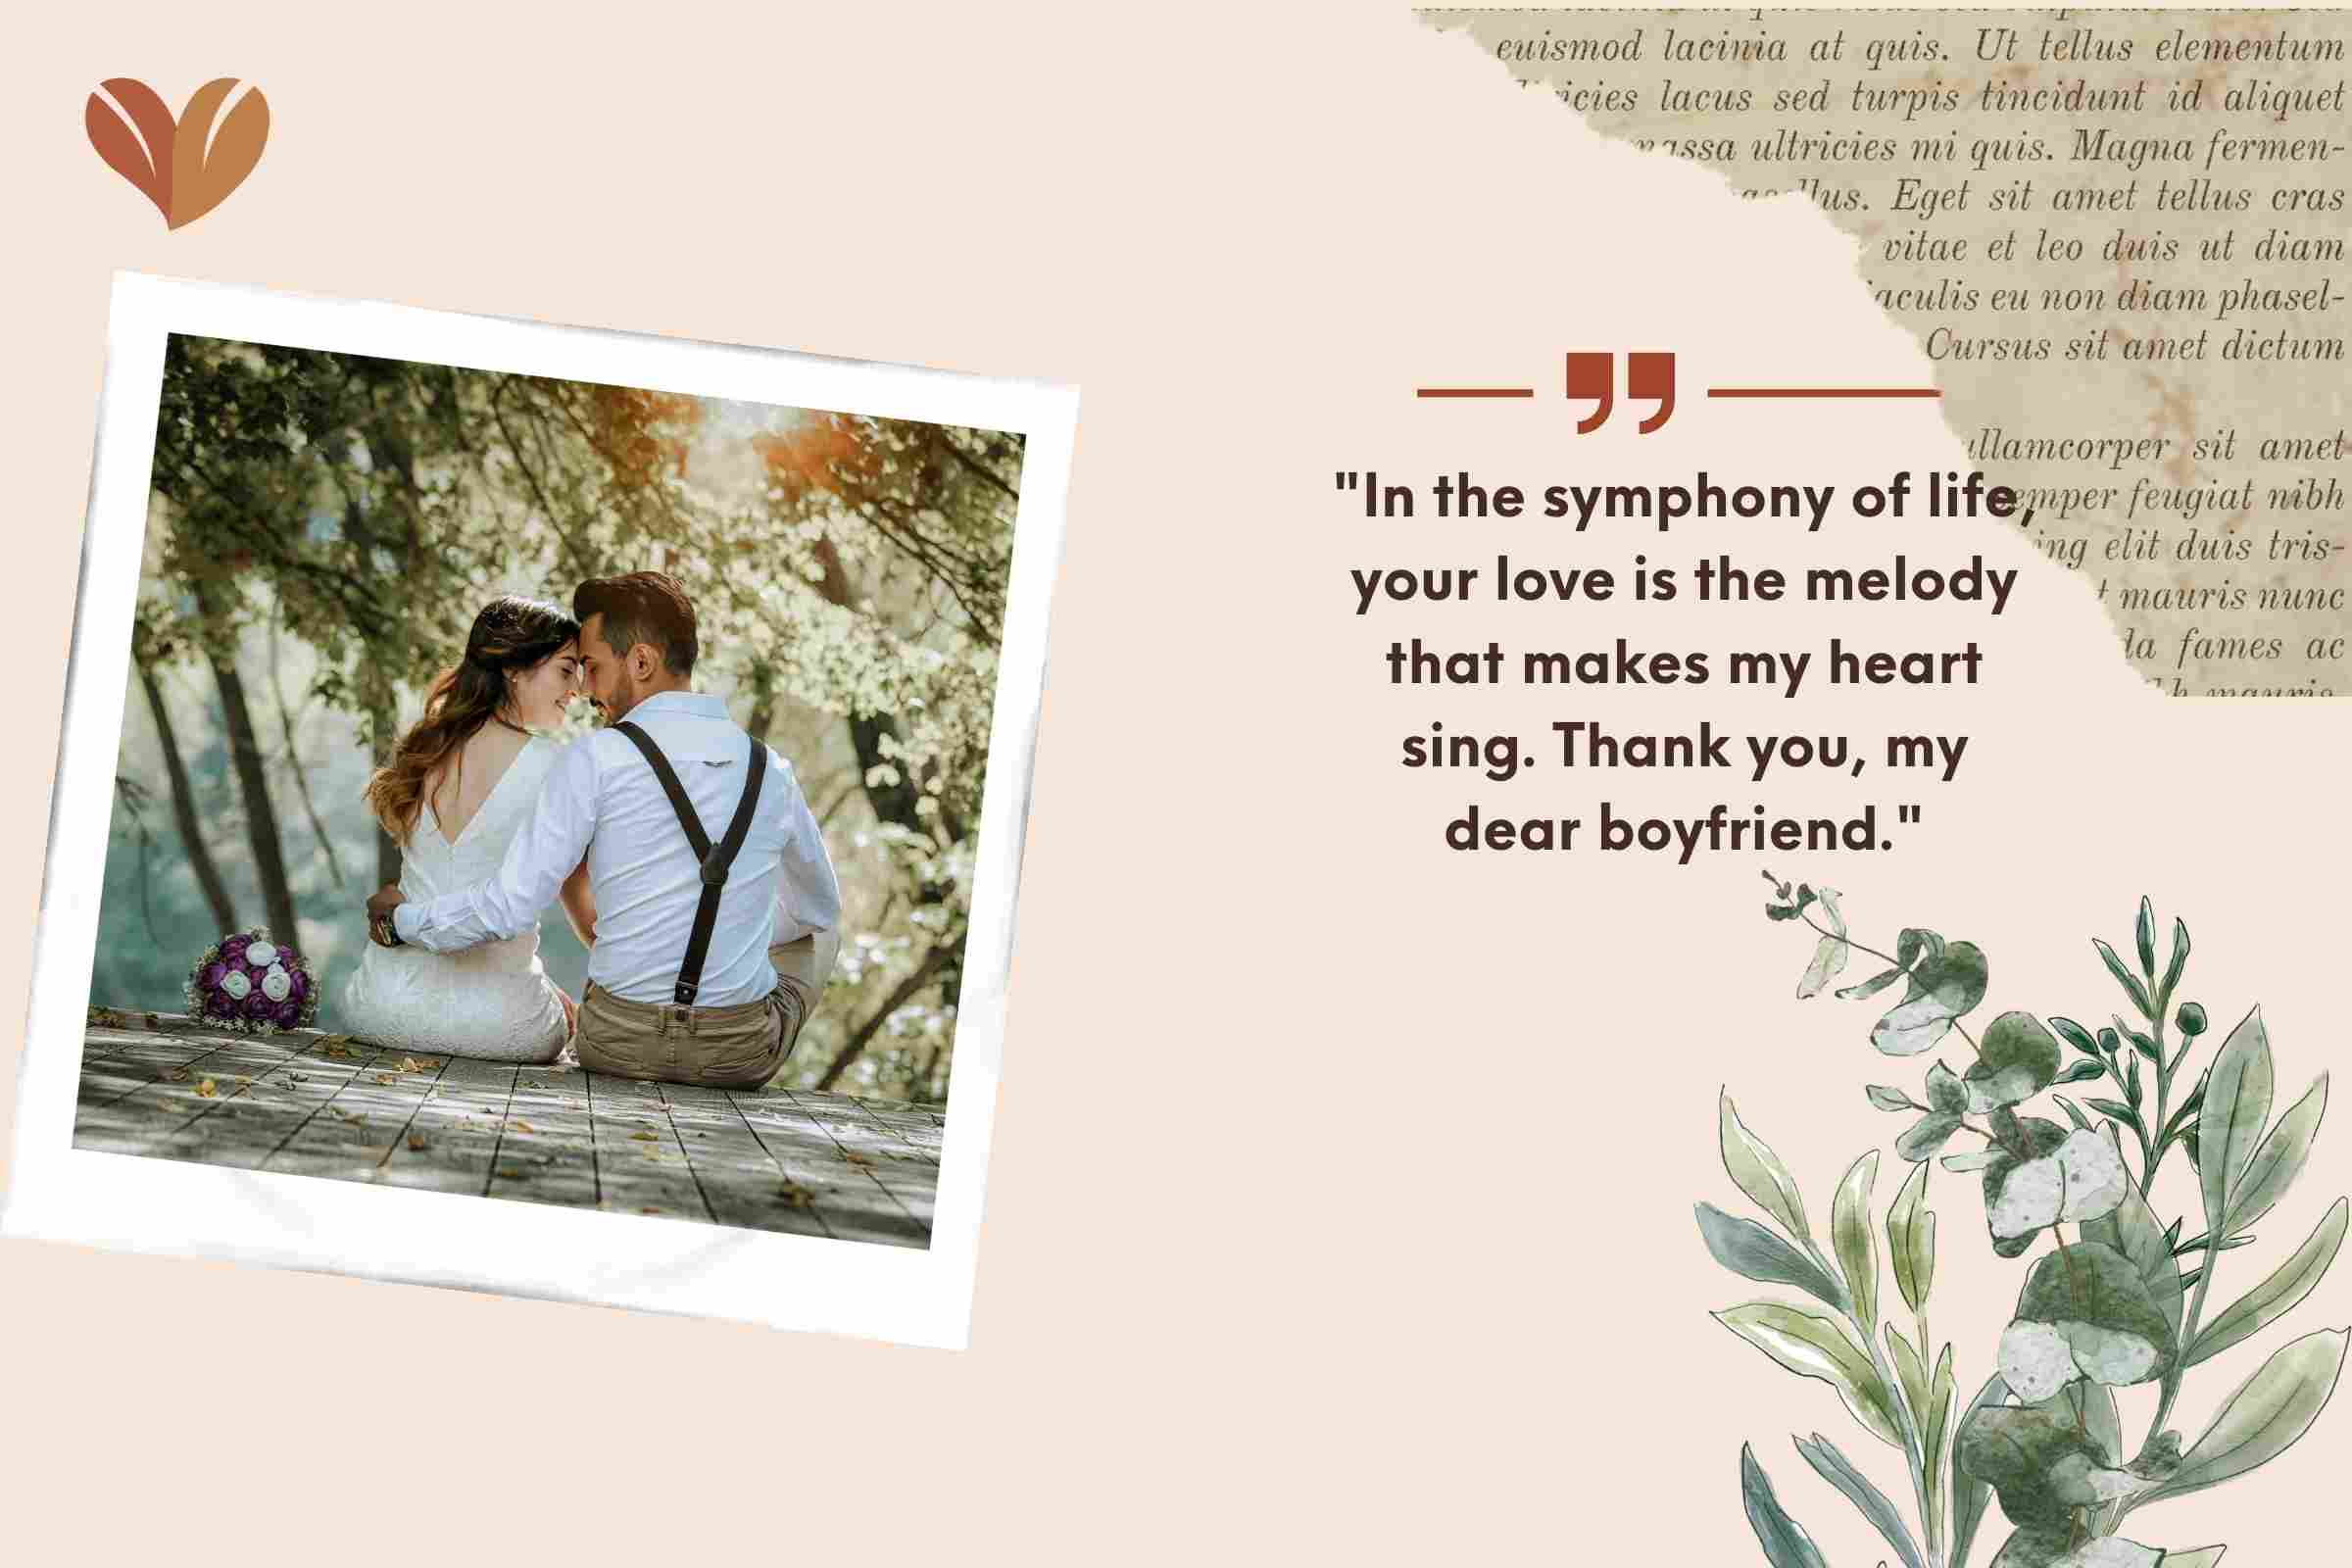 "In the symphony of life, your love is the melody that makes my heart sing. Thank you, my dear boyfriend."